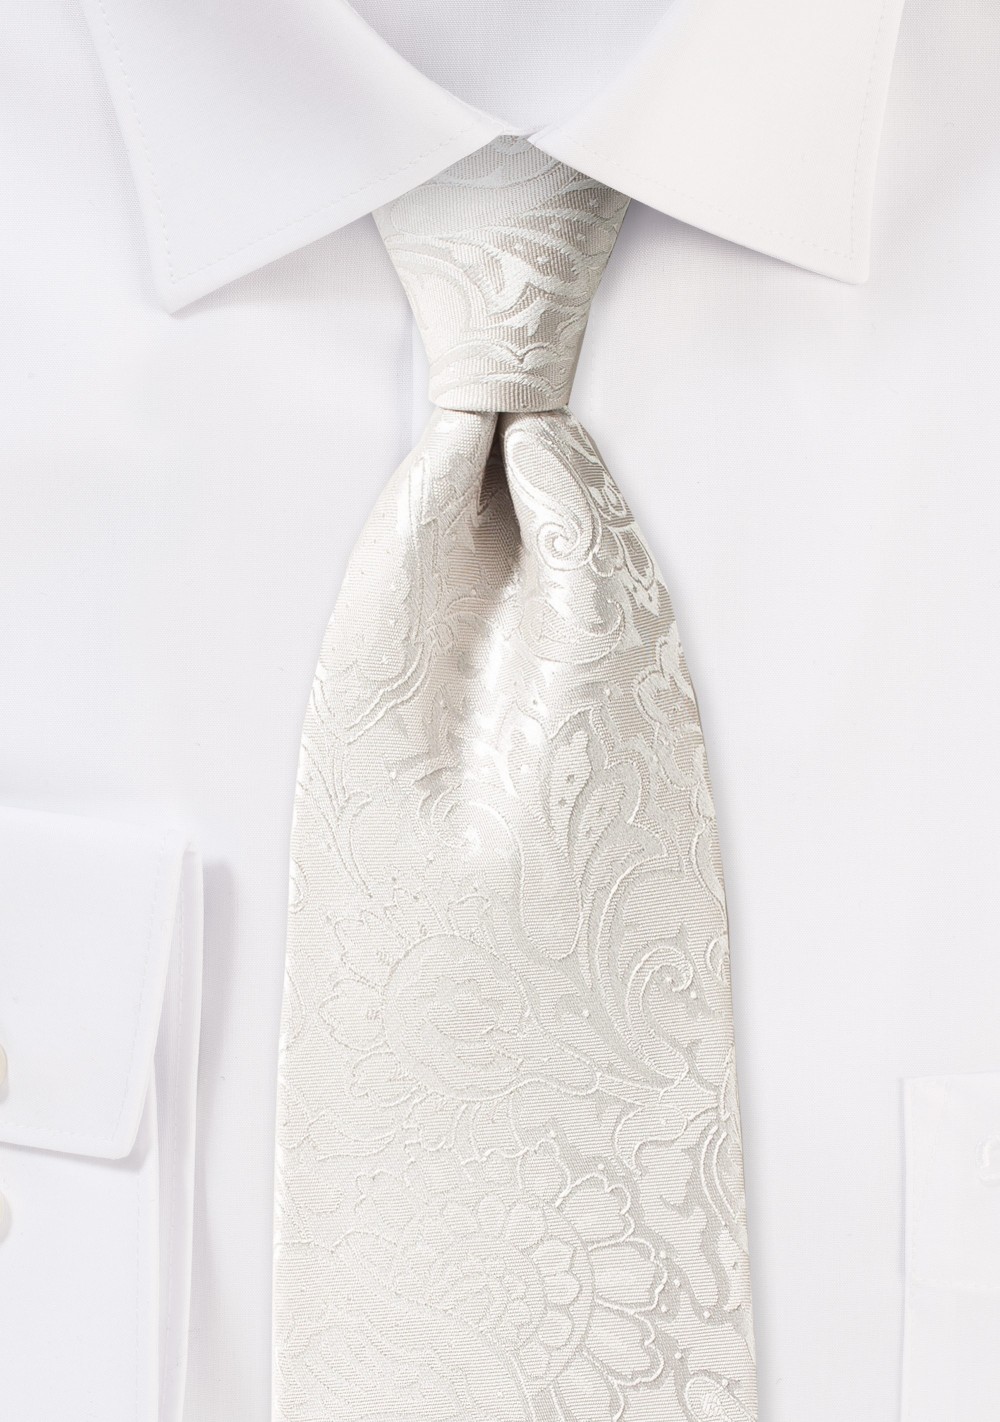 XL Sized Paisley Tie in Light Ivory